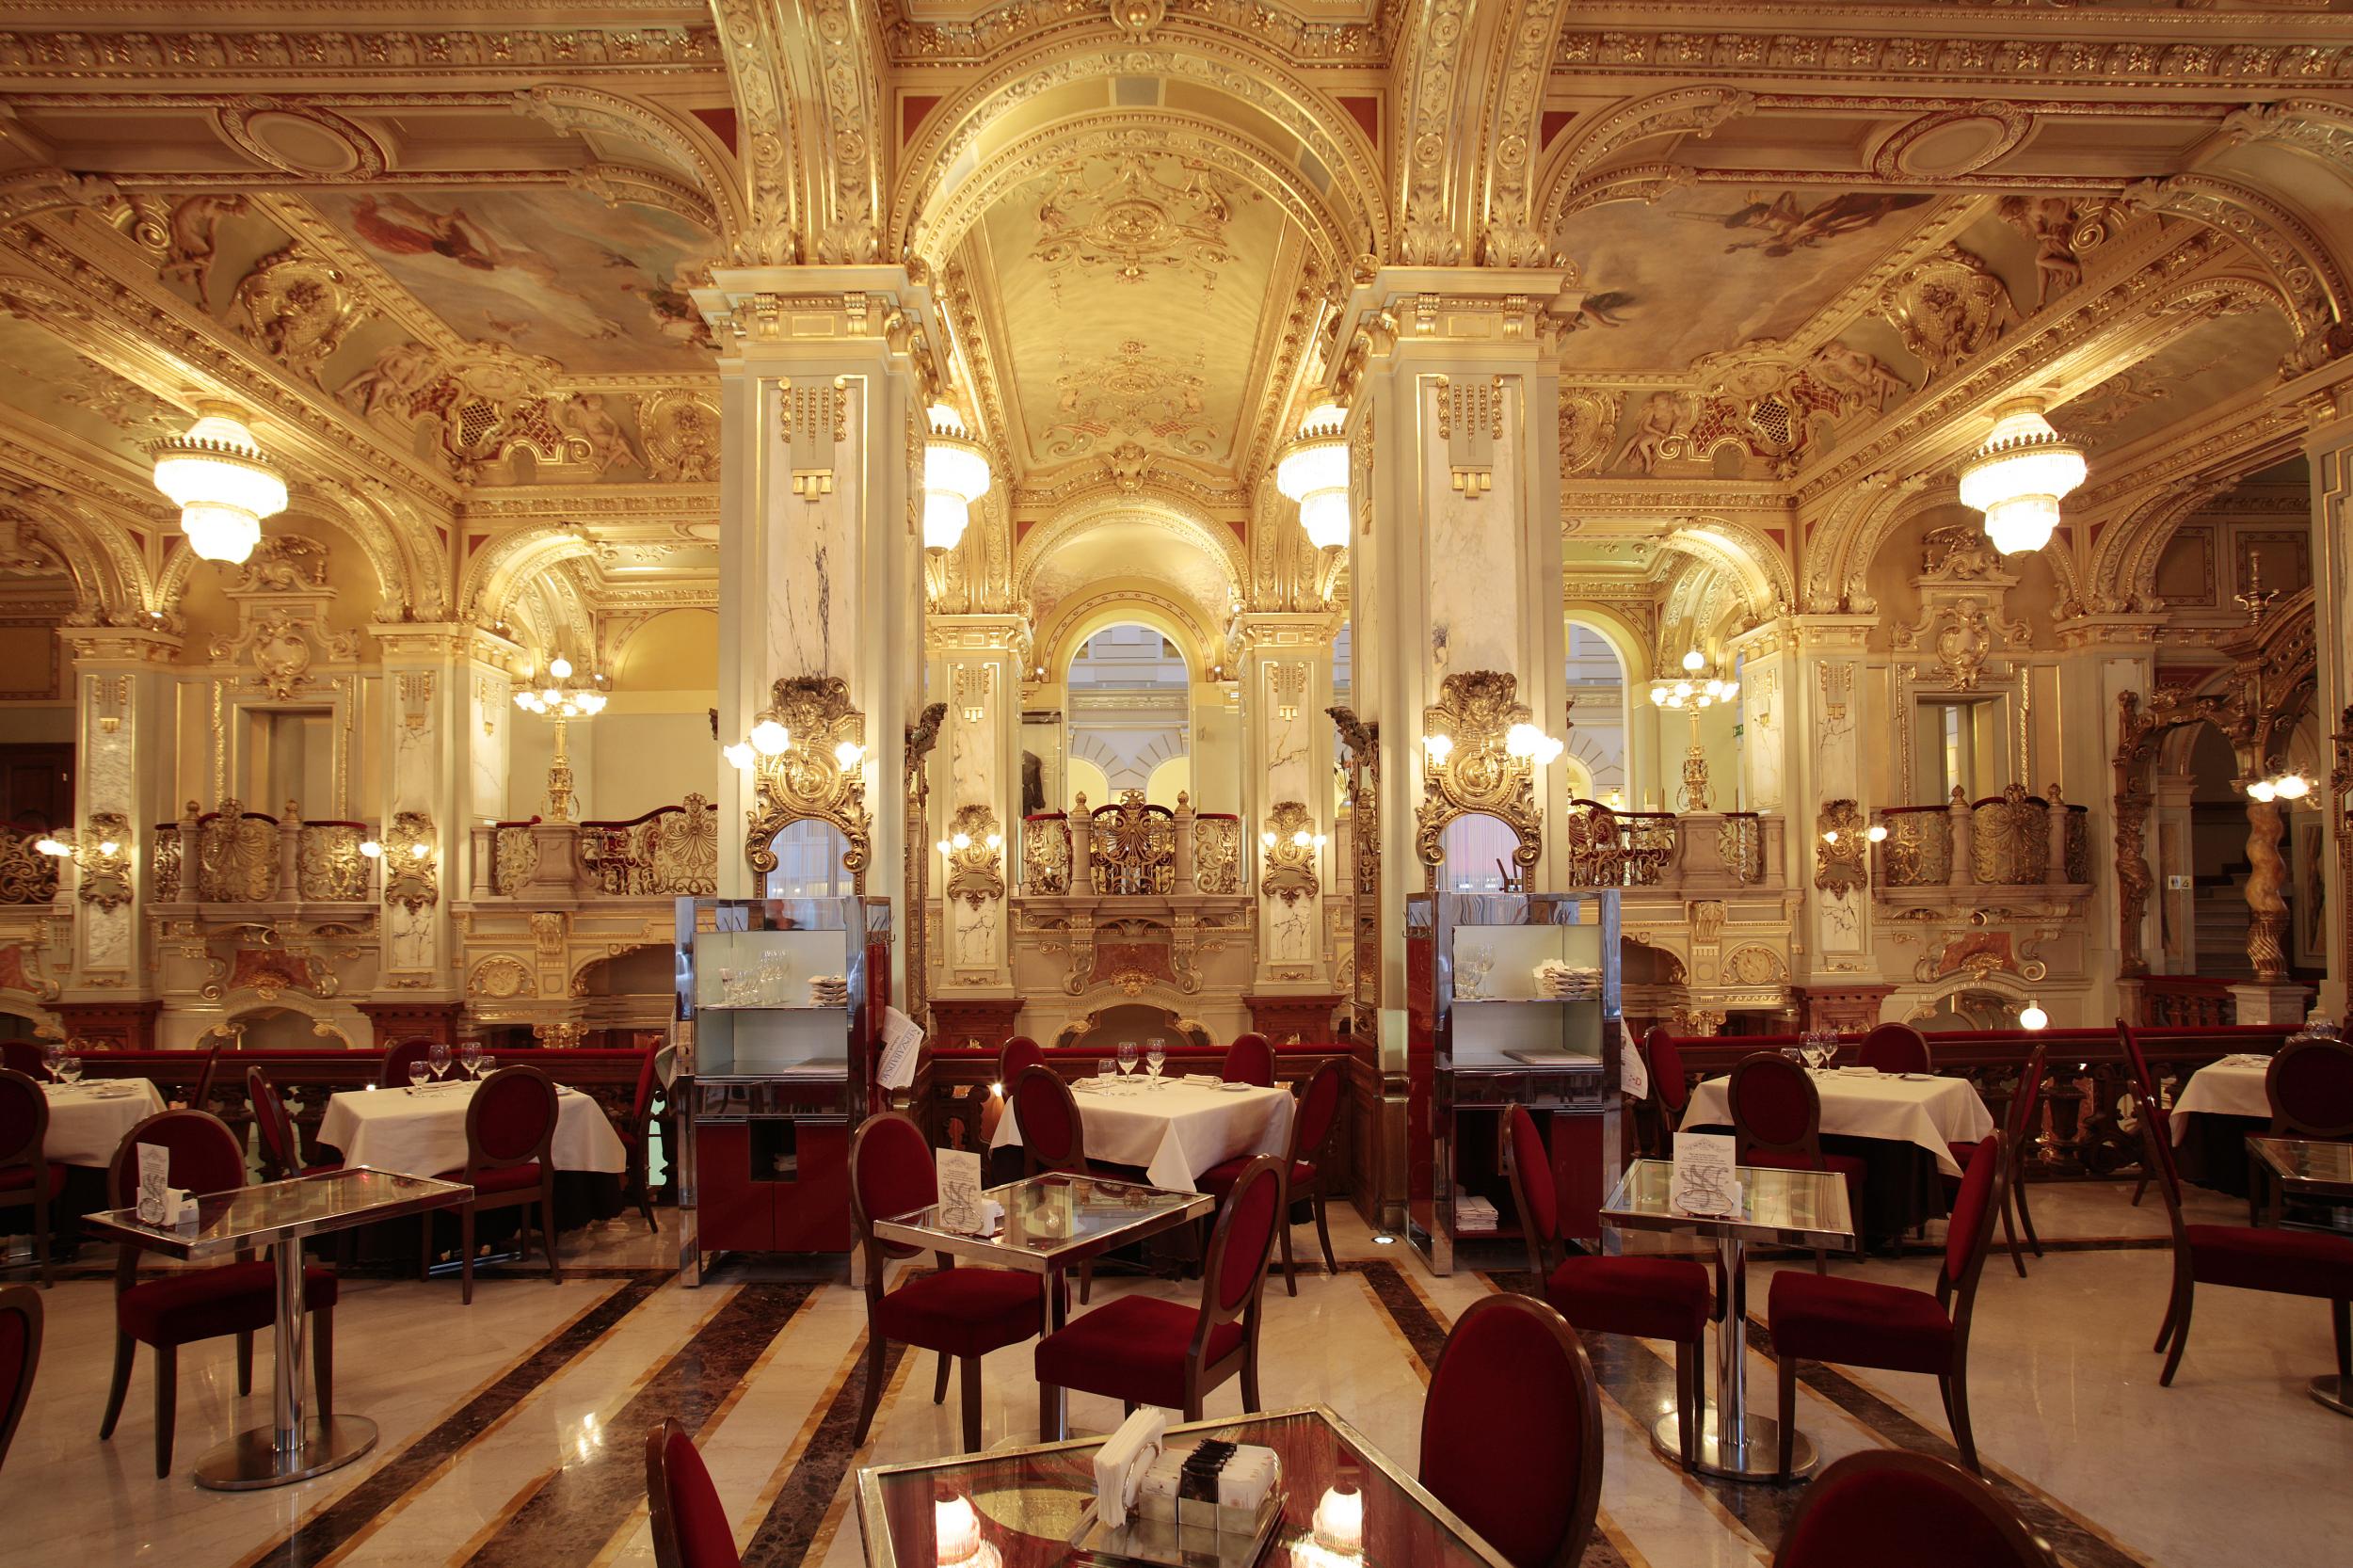 The New York Palace is home to the New York Cafe, one of the world's most beautiful cafes